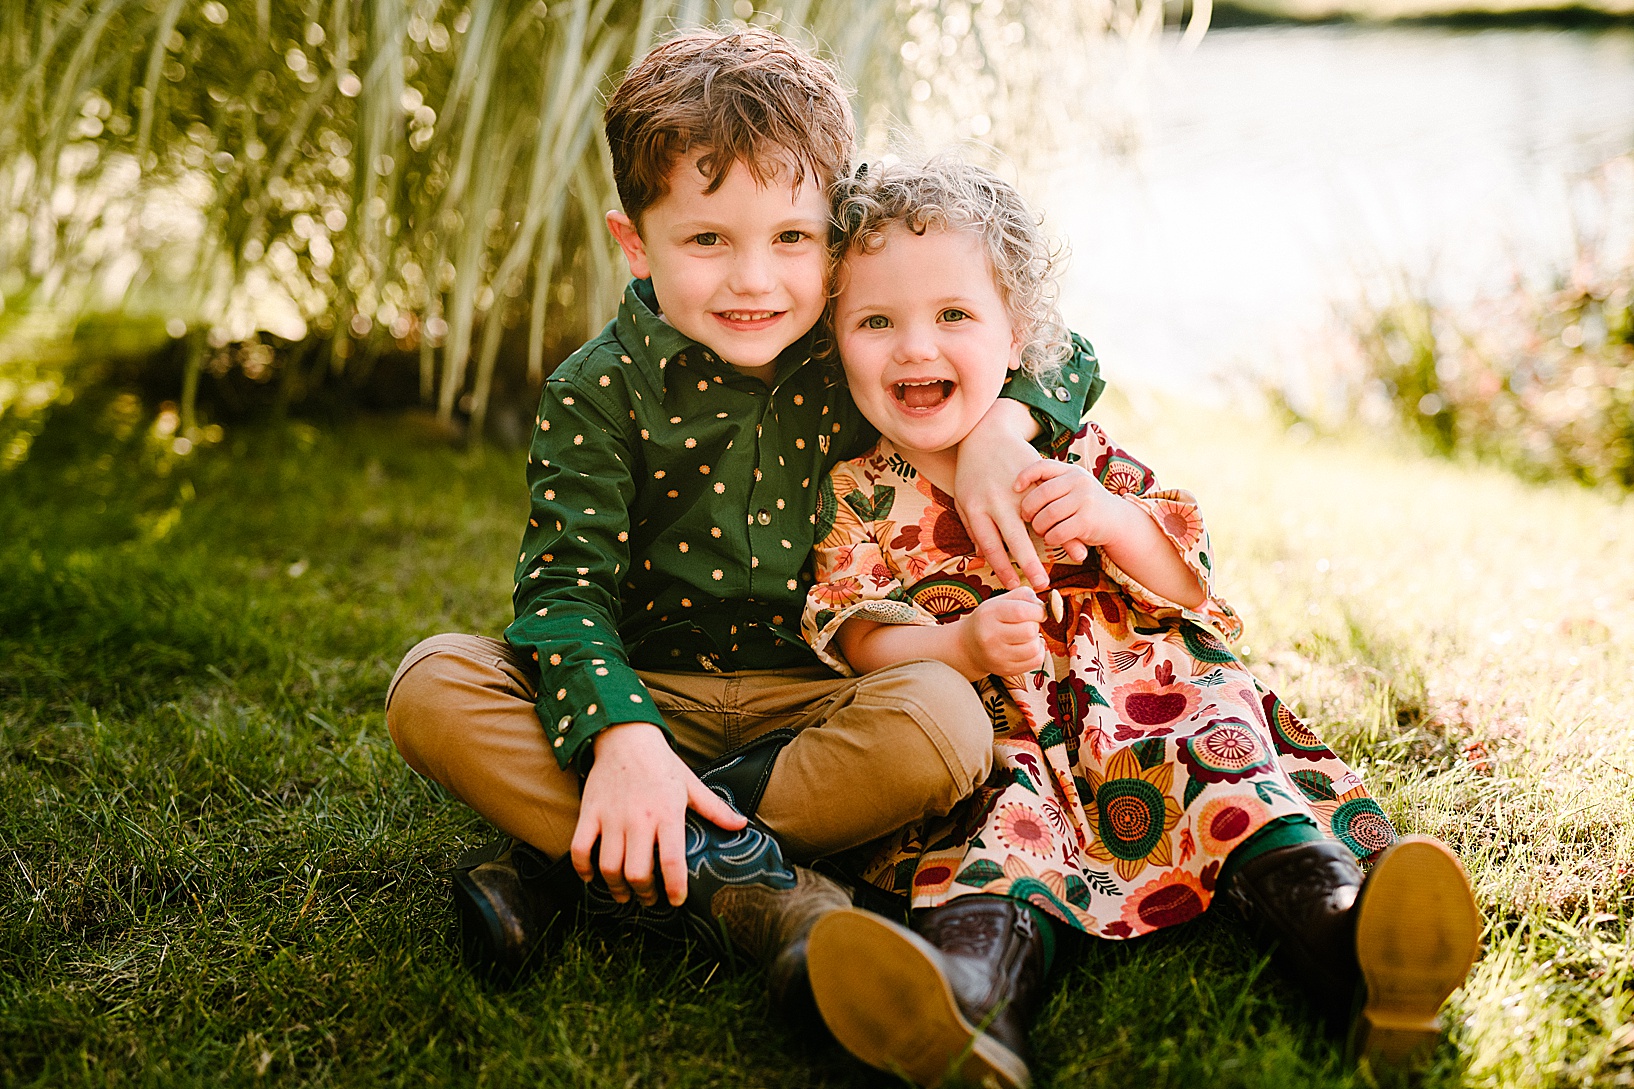 Young boy puts his arm around his toddler sister sitting on the grass while they both wear cowboy boots